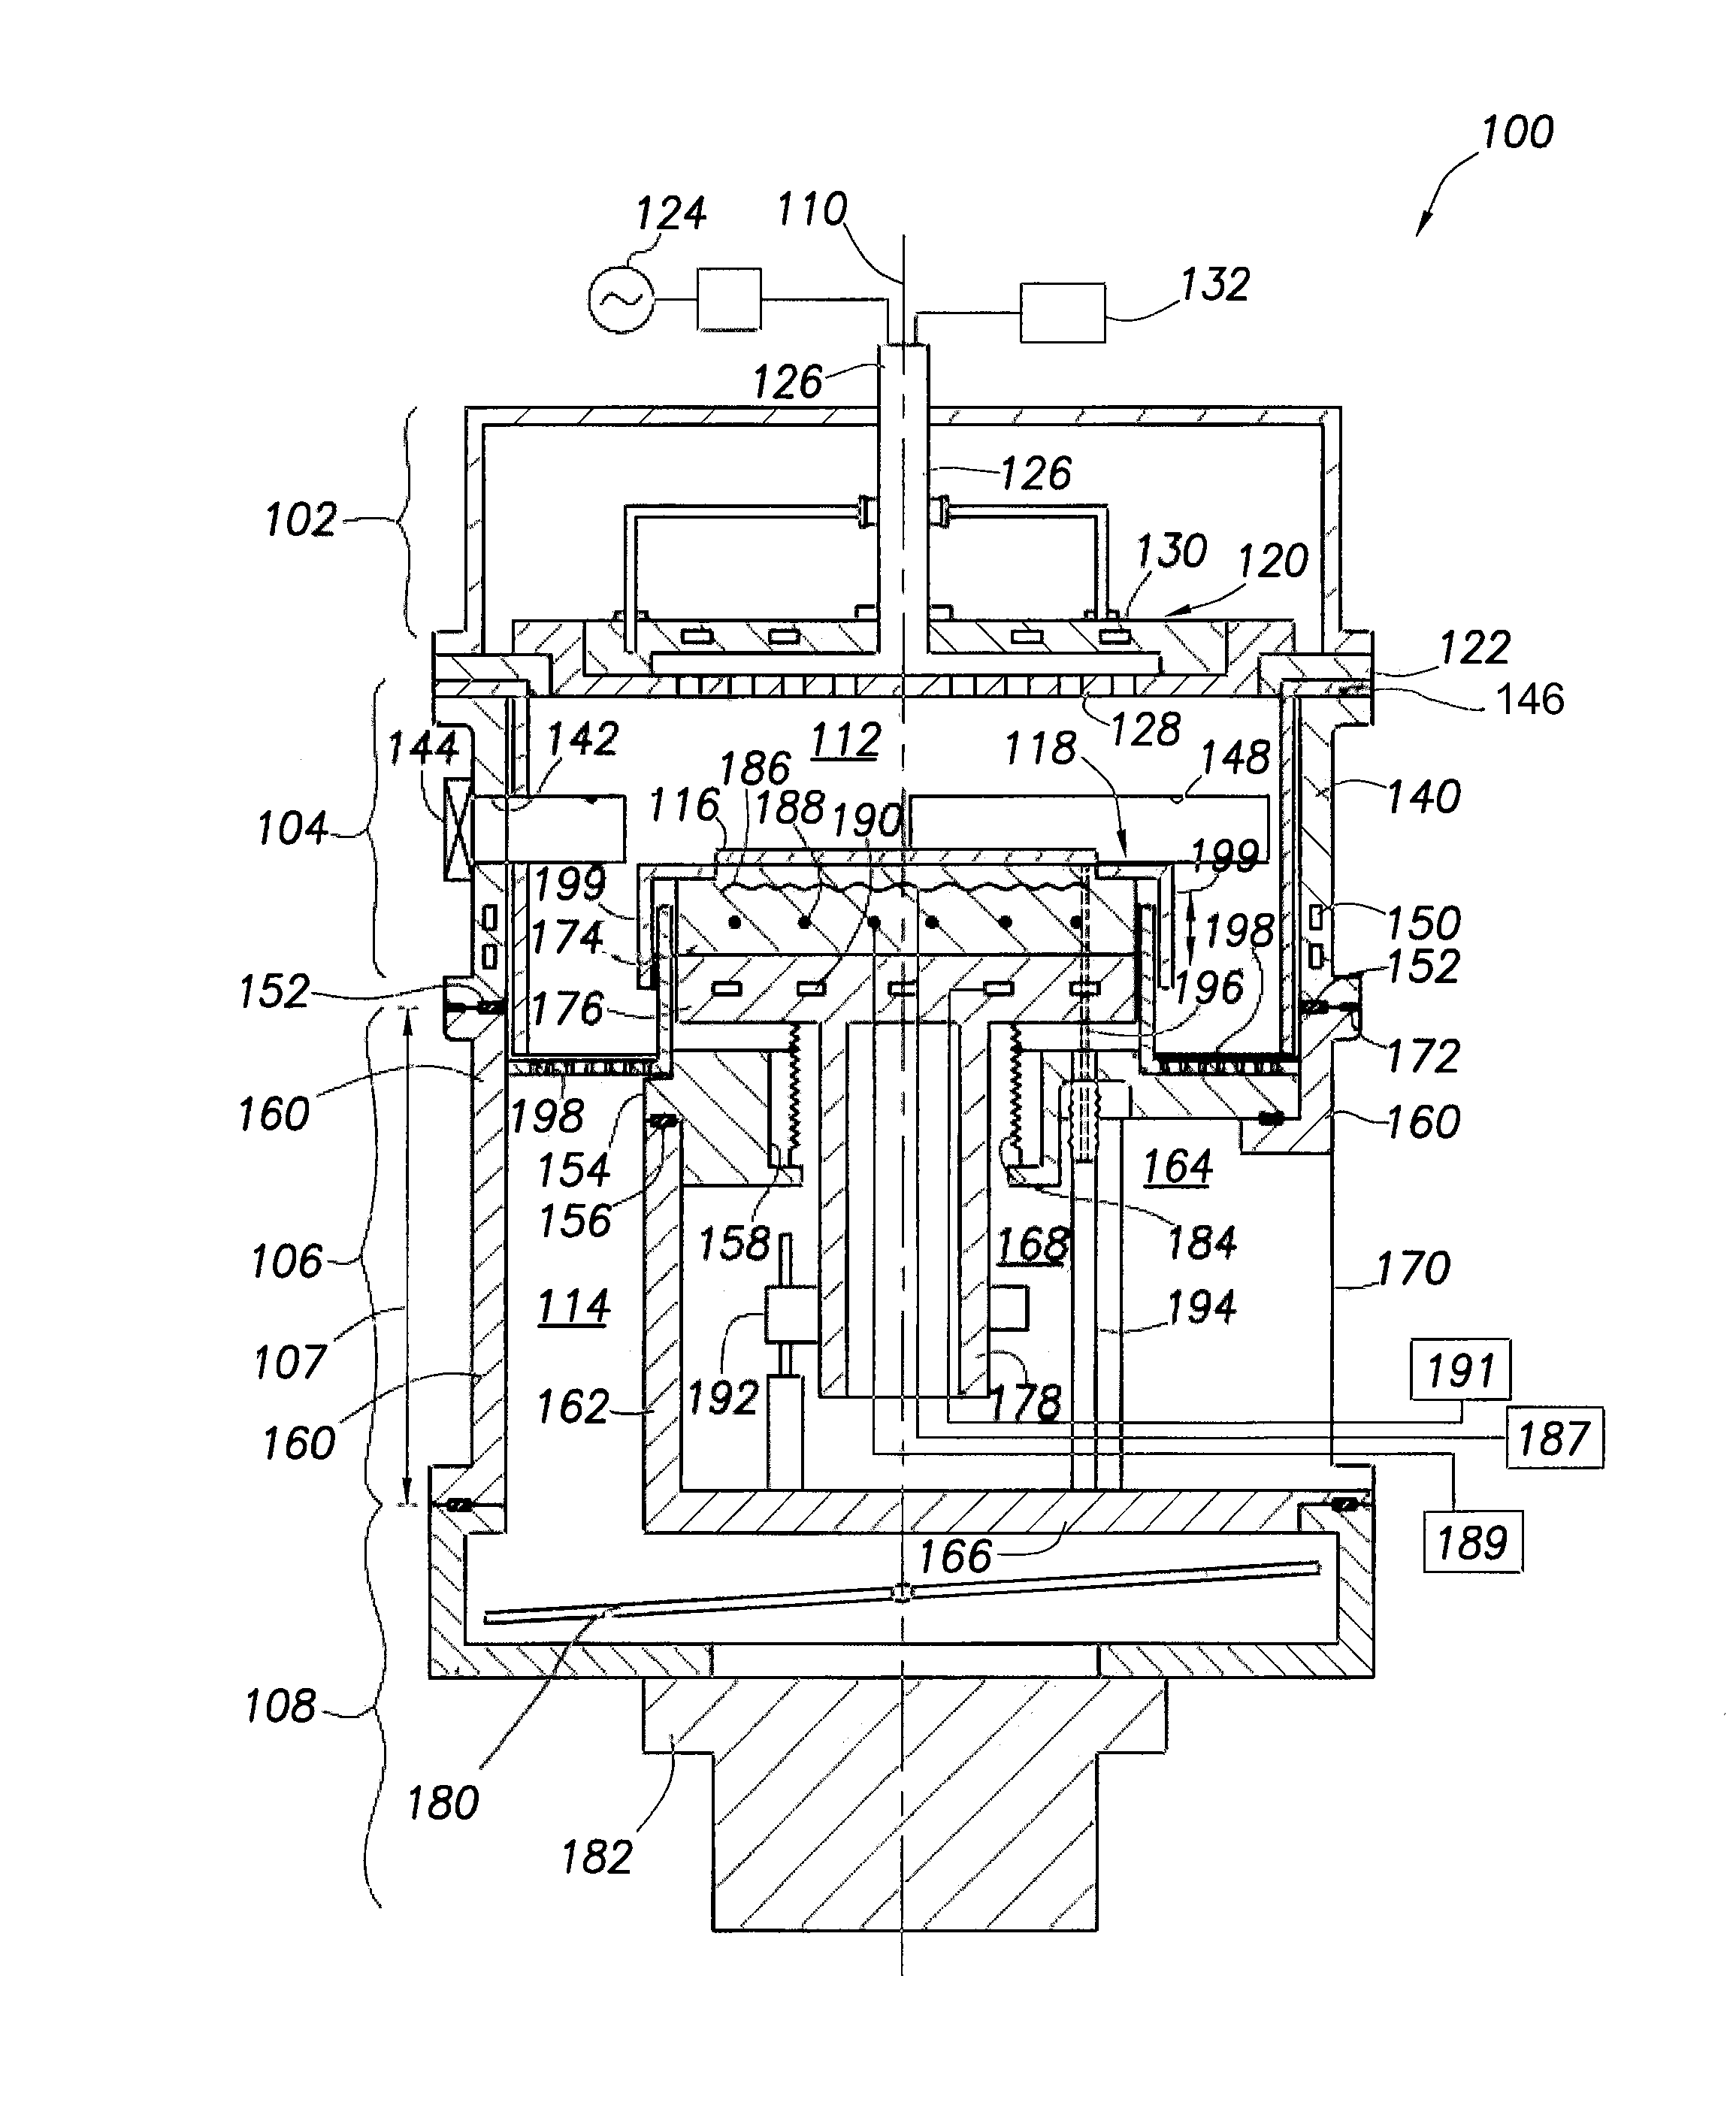 Symmetric chamber body design architecture to address variable process volume with improved flow uniformity/gas conductance